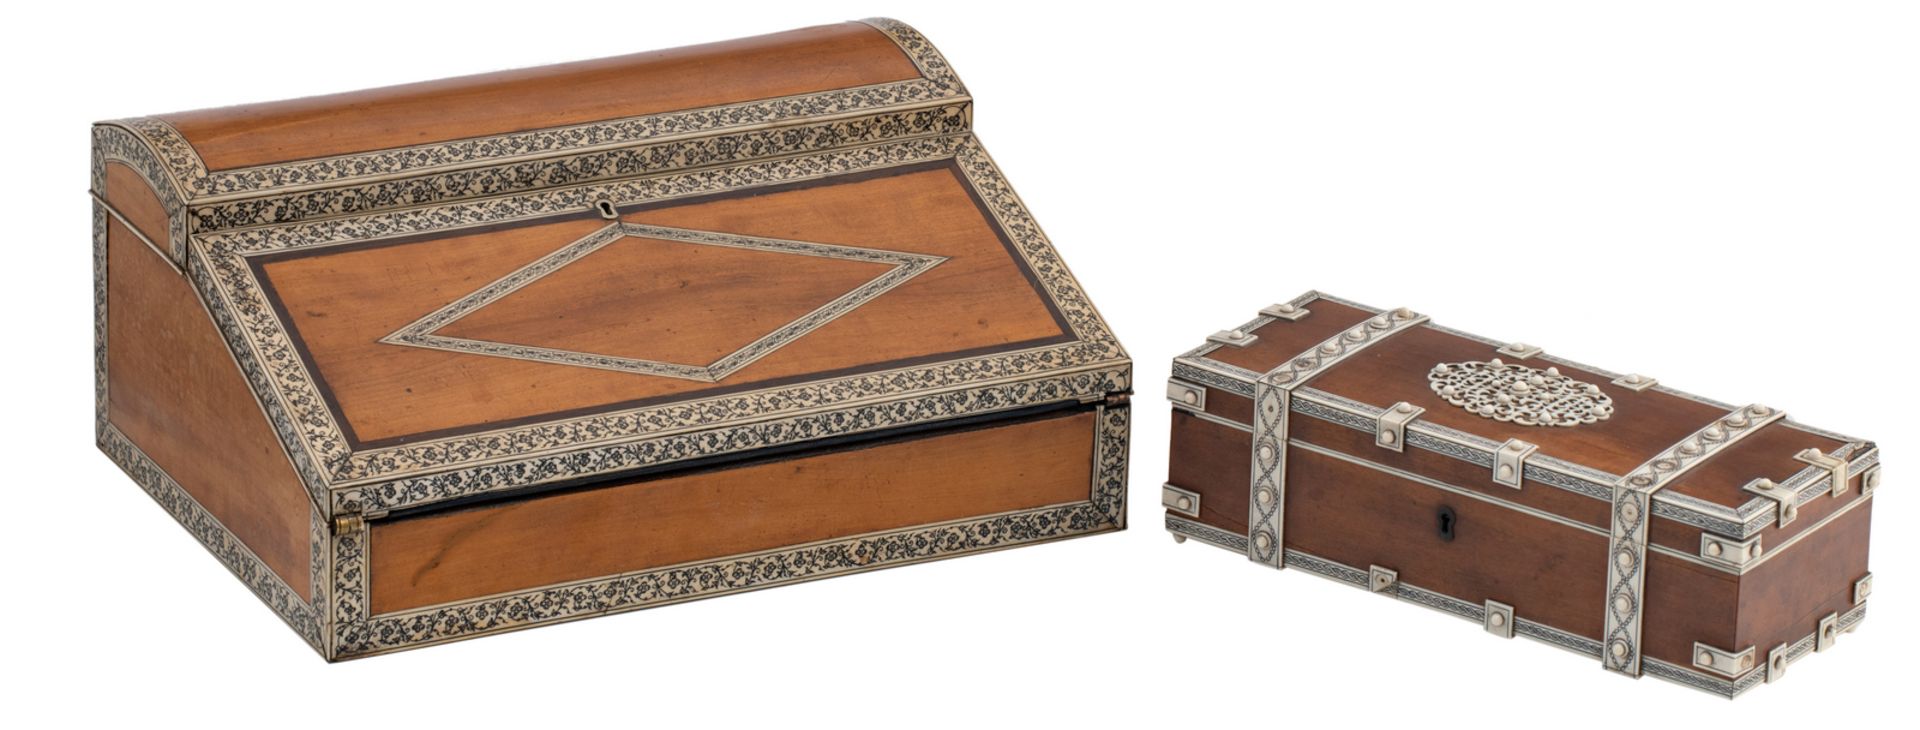 A (cedarwood) writingslope inlaid with engraved ivory, Middle-East, late 19thC, H 15,5 - W 34,5 -